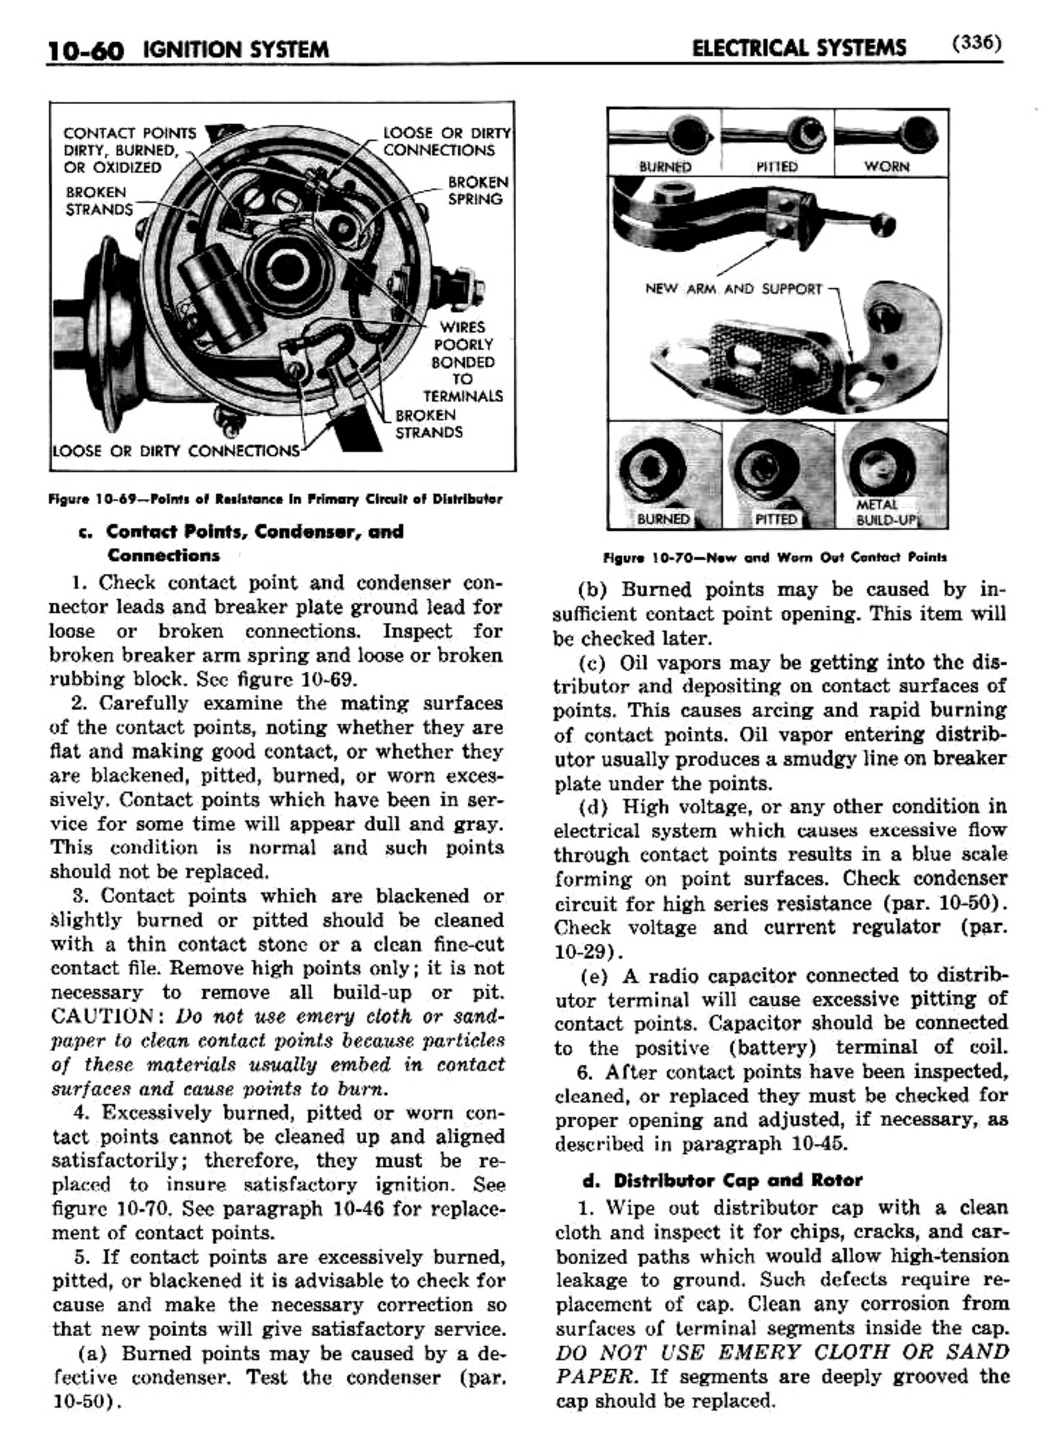 n_11 1948 Buick Shop Manual - Electrical Systems-060-060.jpg